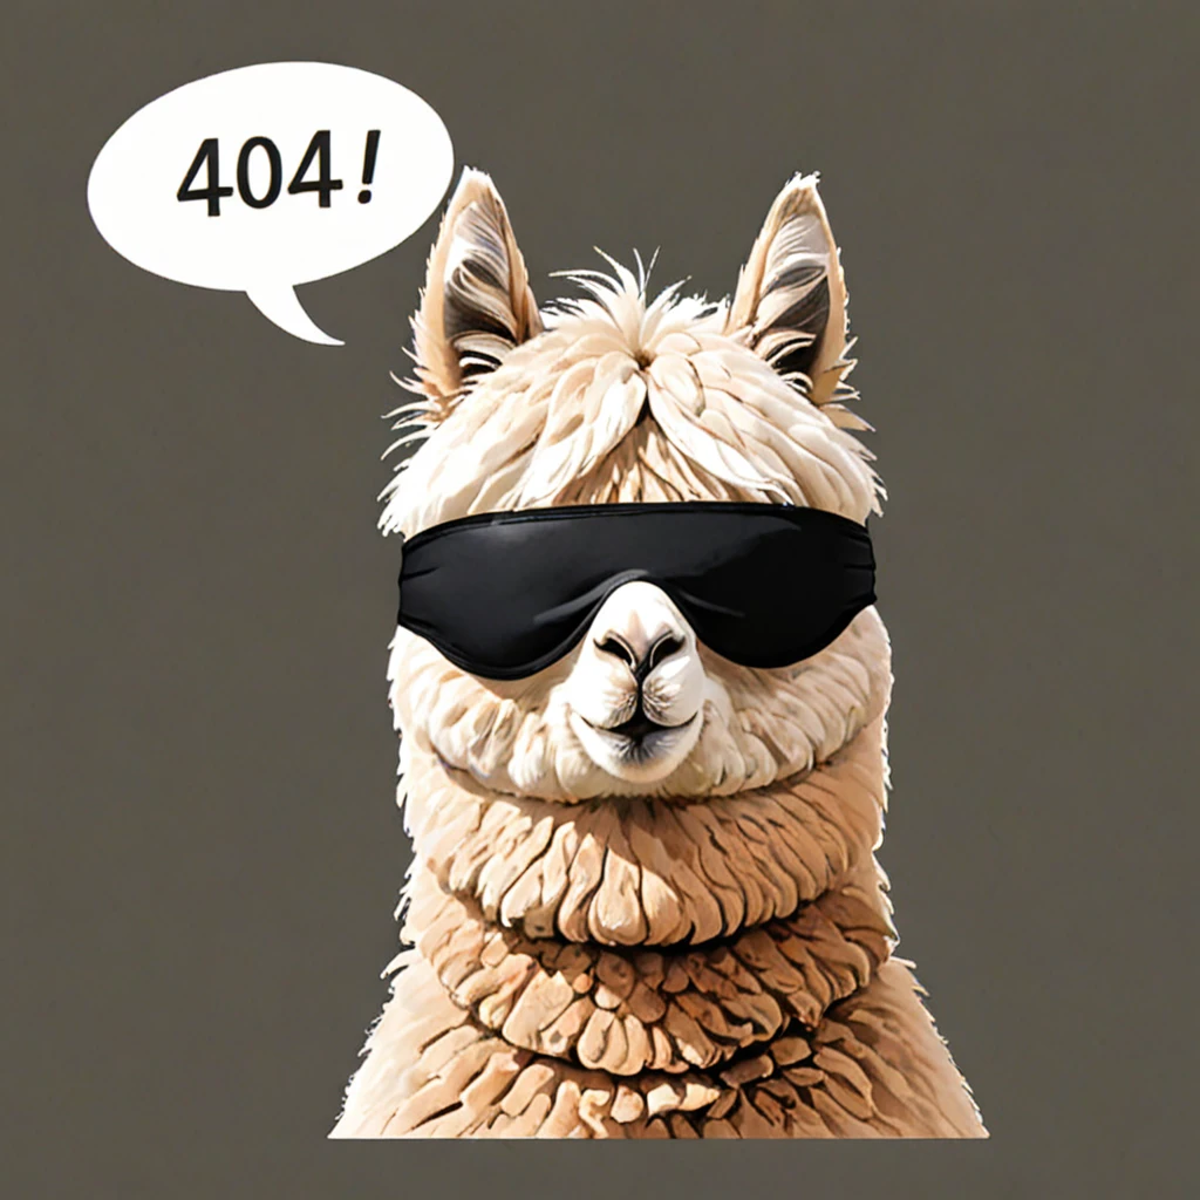 A Large Llama with a 404 Error and Blindfolded Eyes.